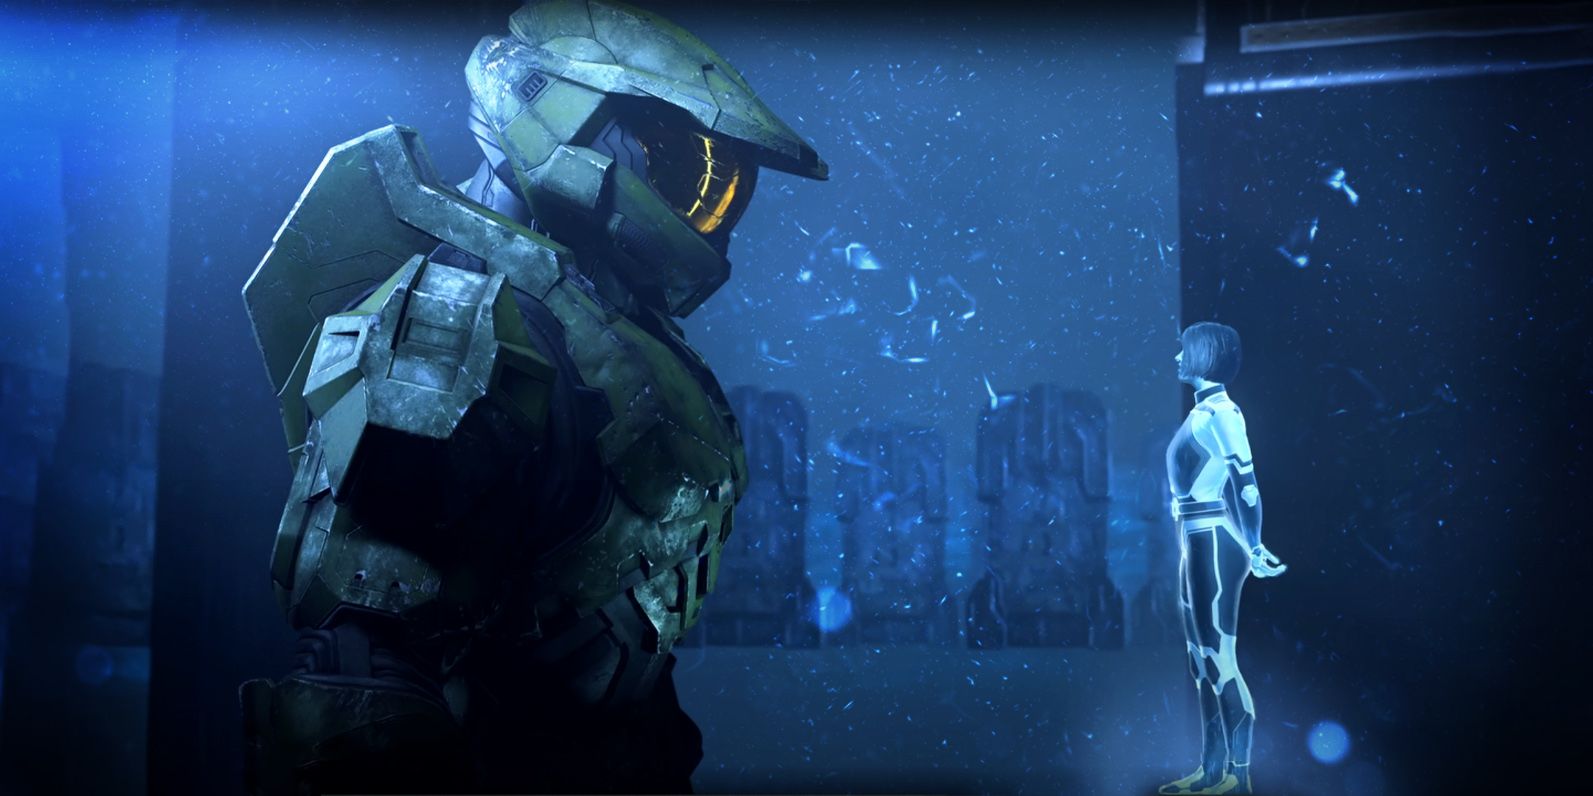 Masterchief up close in profile looking down on a small Cortana